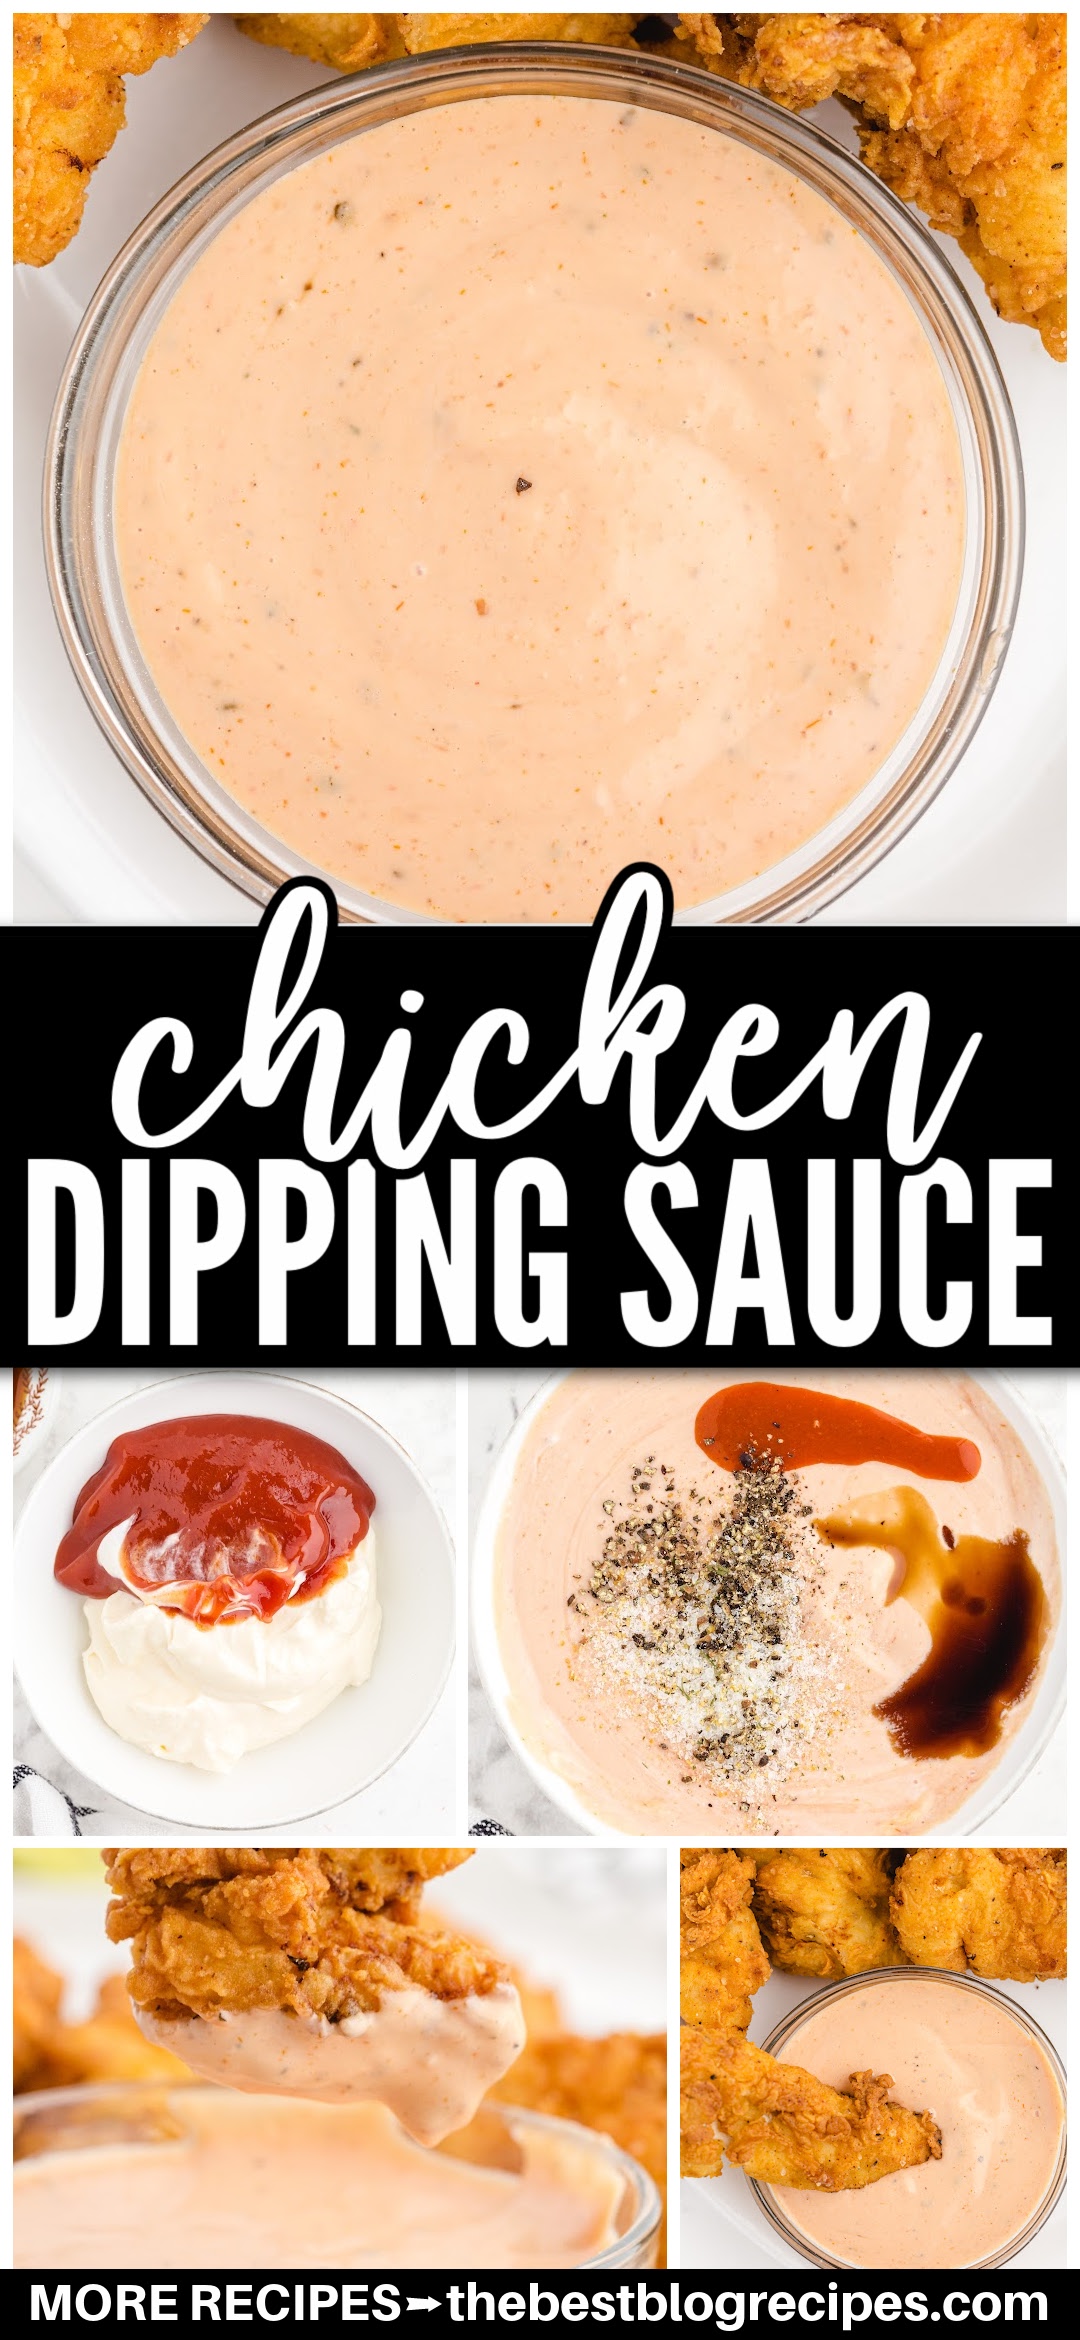 Chicken Finger Dipping Sauce | Appetizers | The Best Blog Recipes